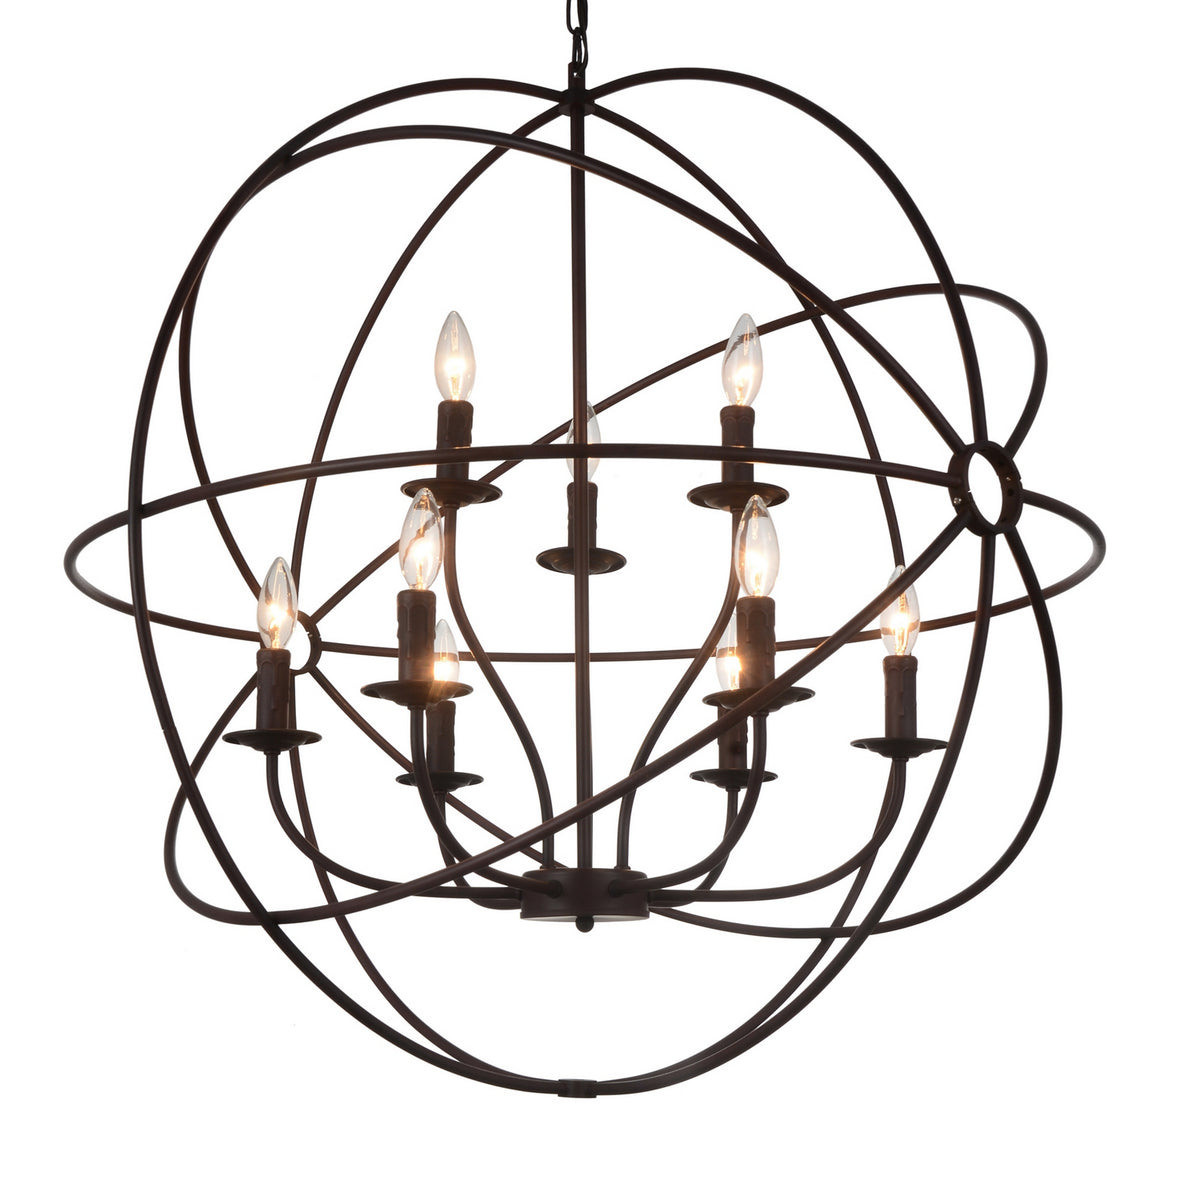 CWI Lighting Nine Light Chandelier from the Arza collection in Brown finish